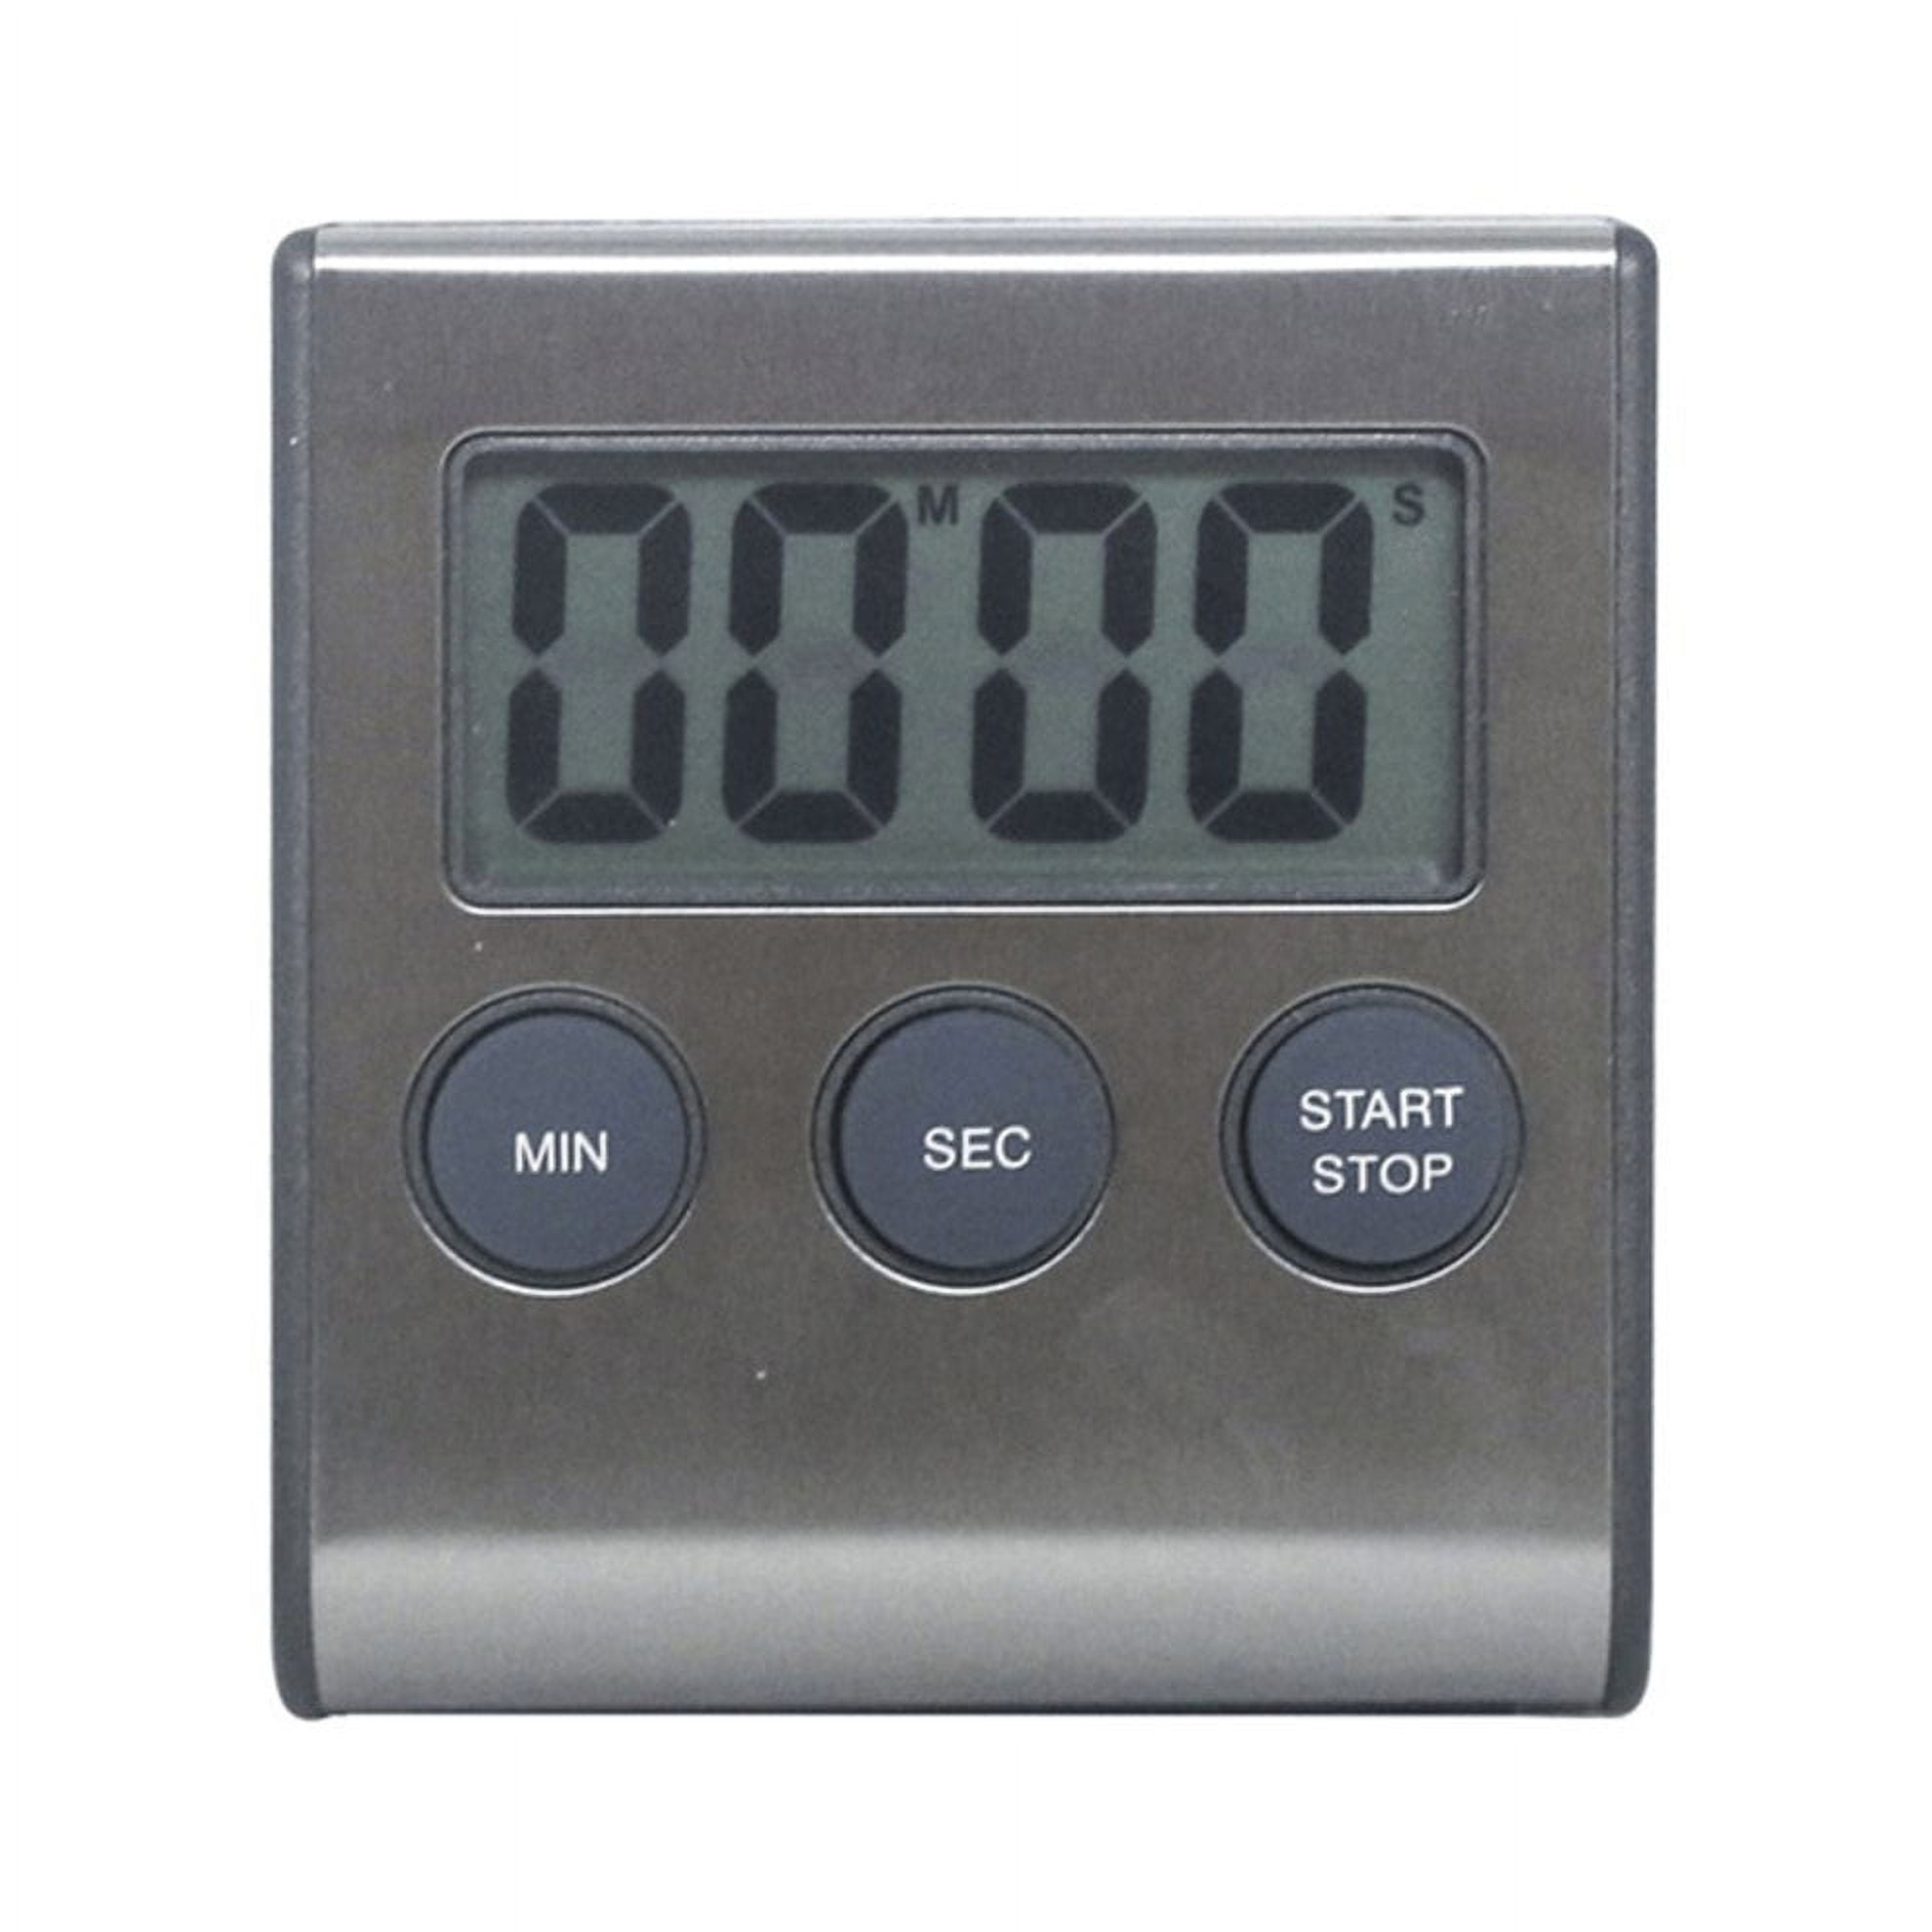 Wholesale small digital timer products, our Kitchen Helpers 